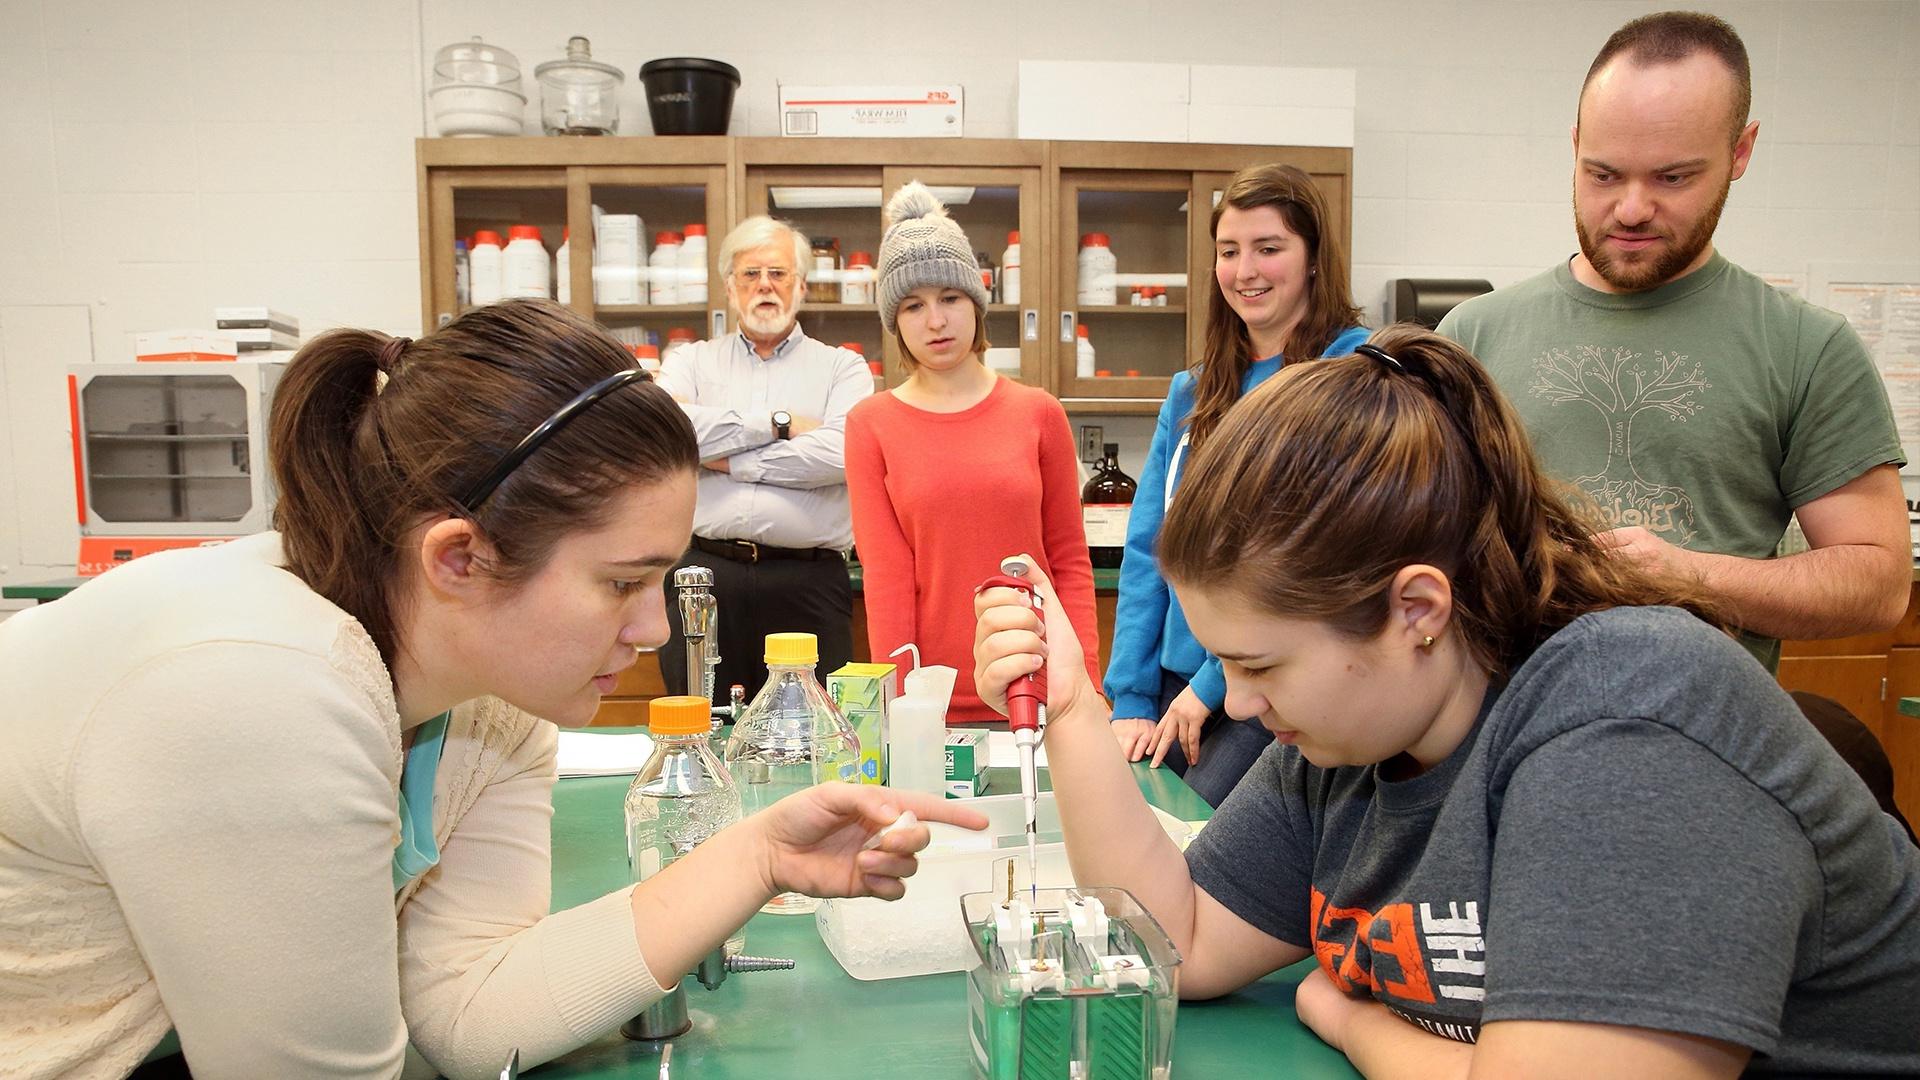 Undergrad biology students doing hands-on research in an Ohio-based BGSU biology lab, one of 40 in the Life 科学 Building.